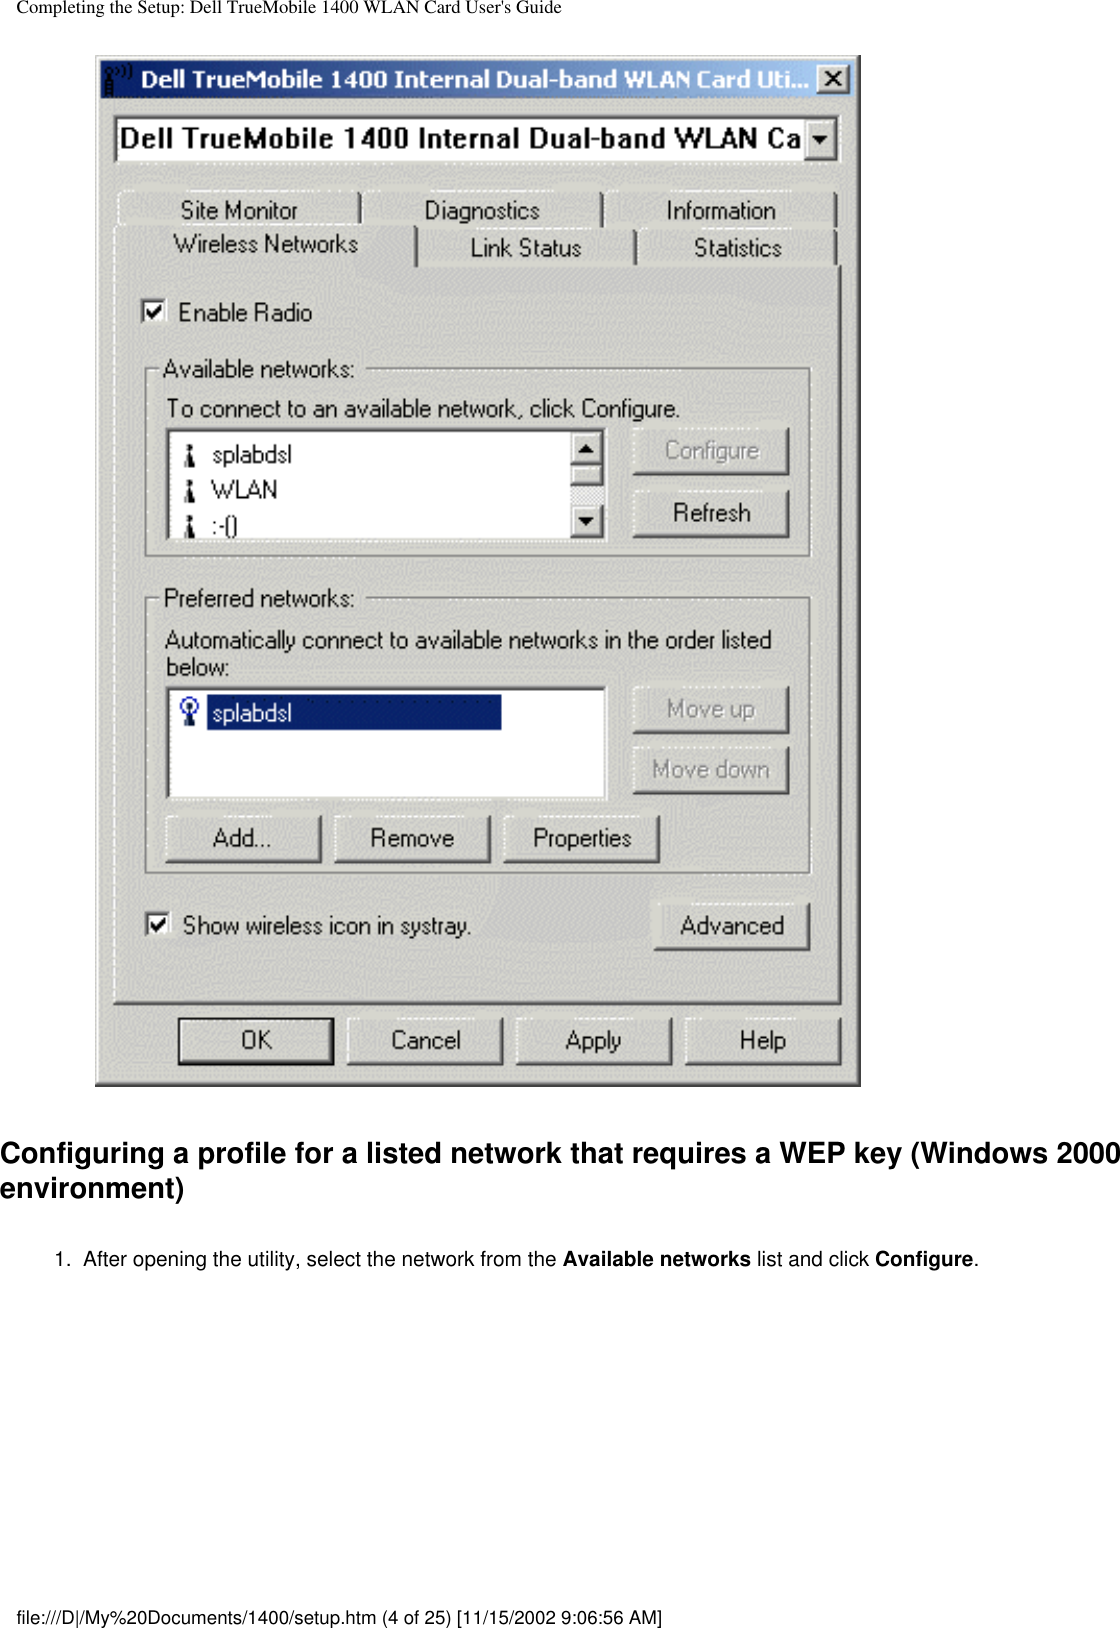 Completing the Setup: Dell TrueMobile 1400 WLAN Card User&apos;s GuideConfiguring a profile for a listed network that requires a WEP key (Windows 2000 environment)1.  After opening the utility, select the network from the Available networks list and click Configure. file:///D|/My%20Documents/1400/setup.htm (4 of 25) [11/15/2002 9:06:56 AM]